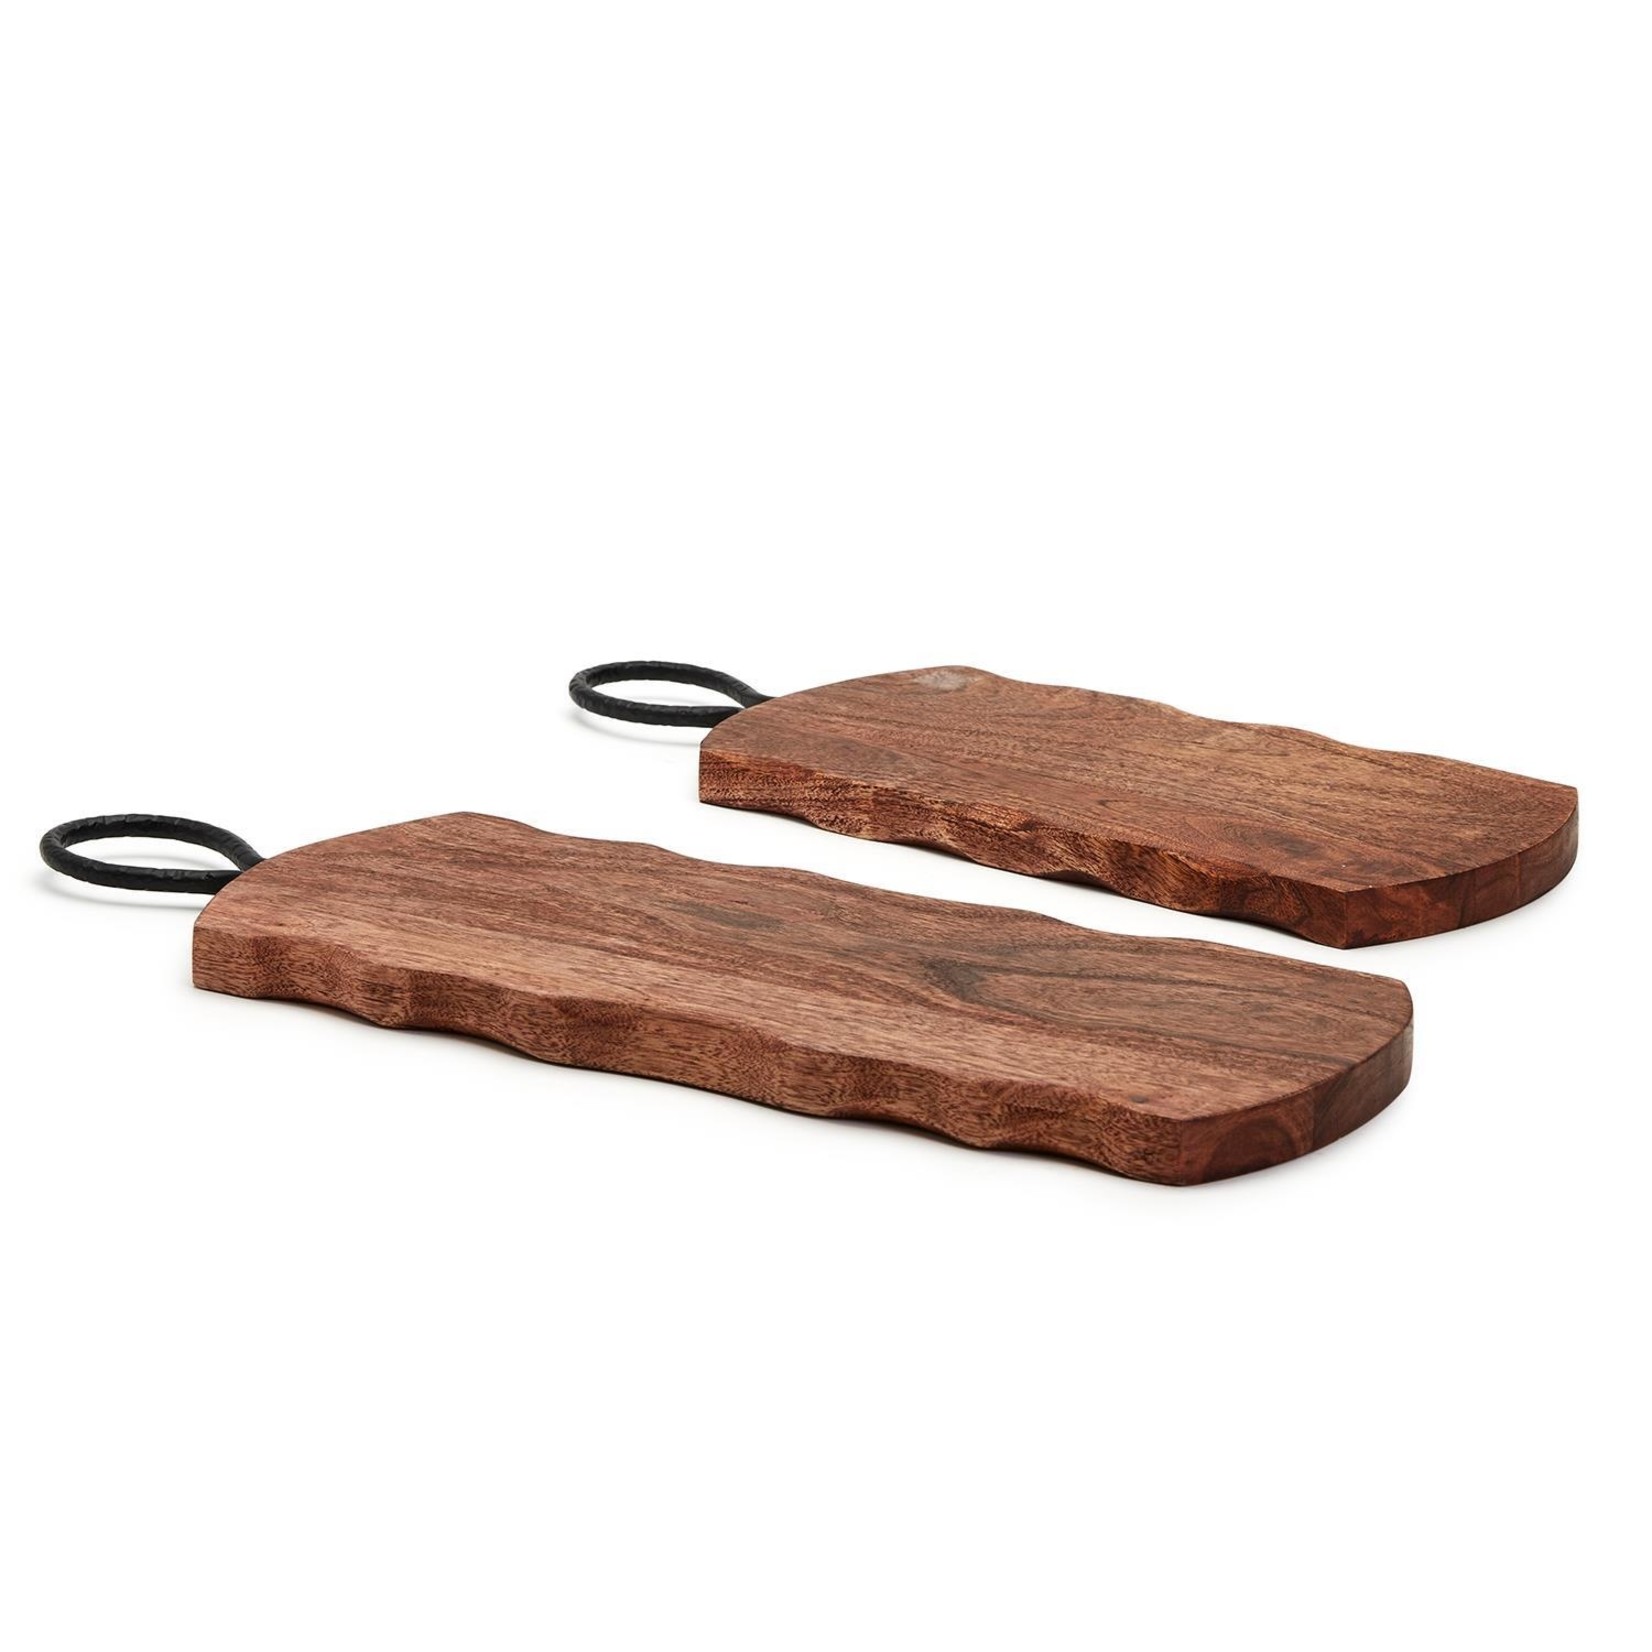 Two's Company Rustic Edge Charcuterie Serving Board w/Hammered Iron Handle, Small